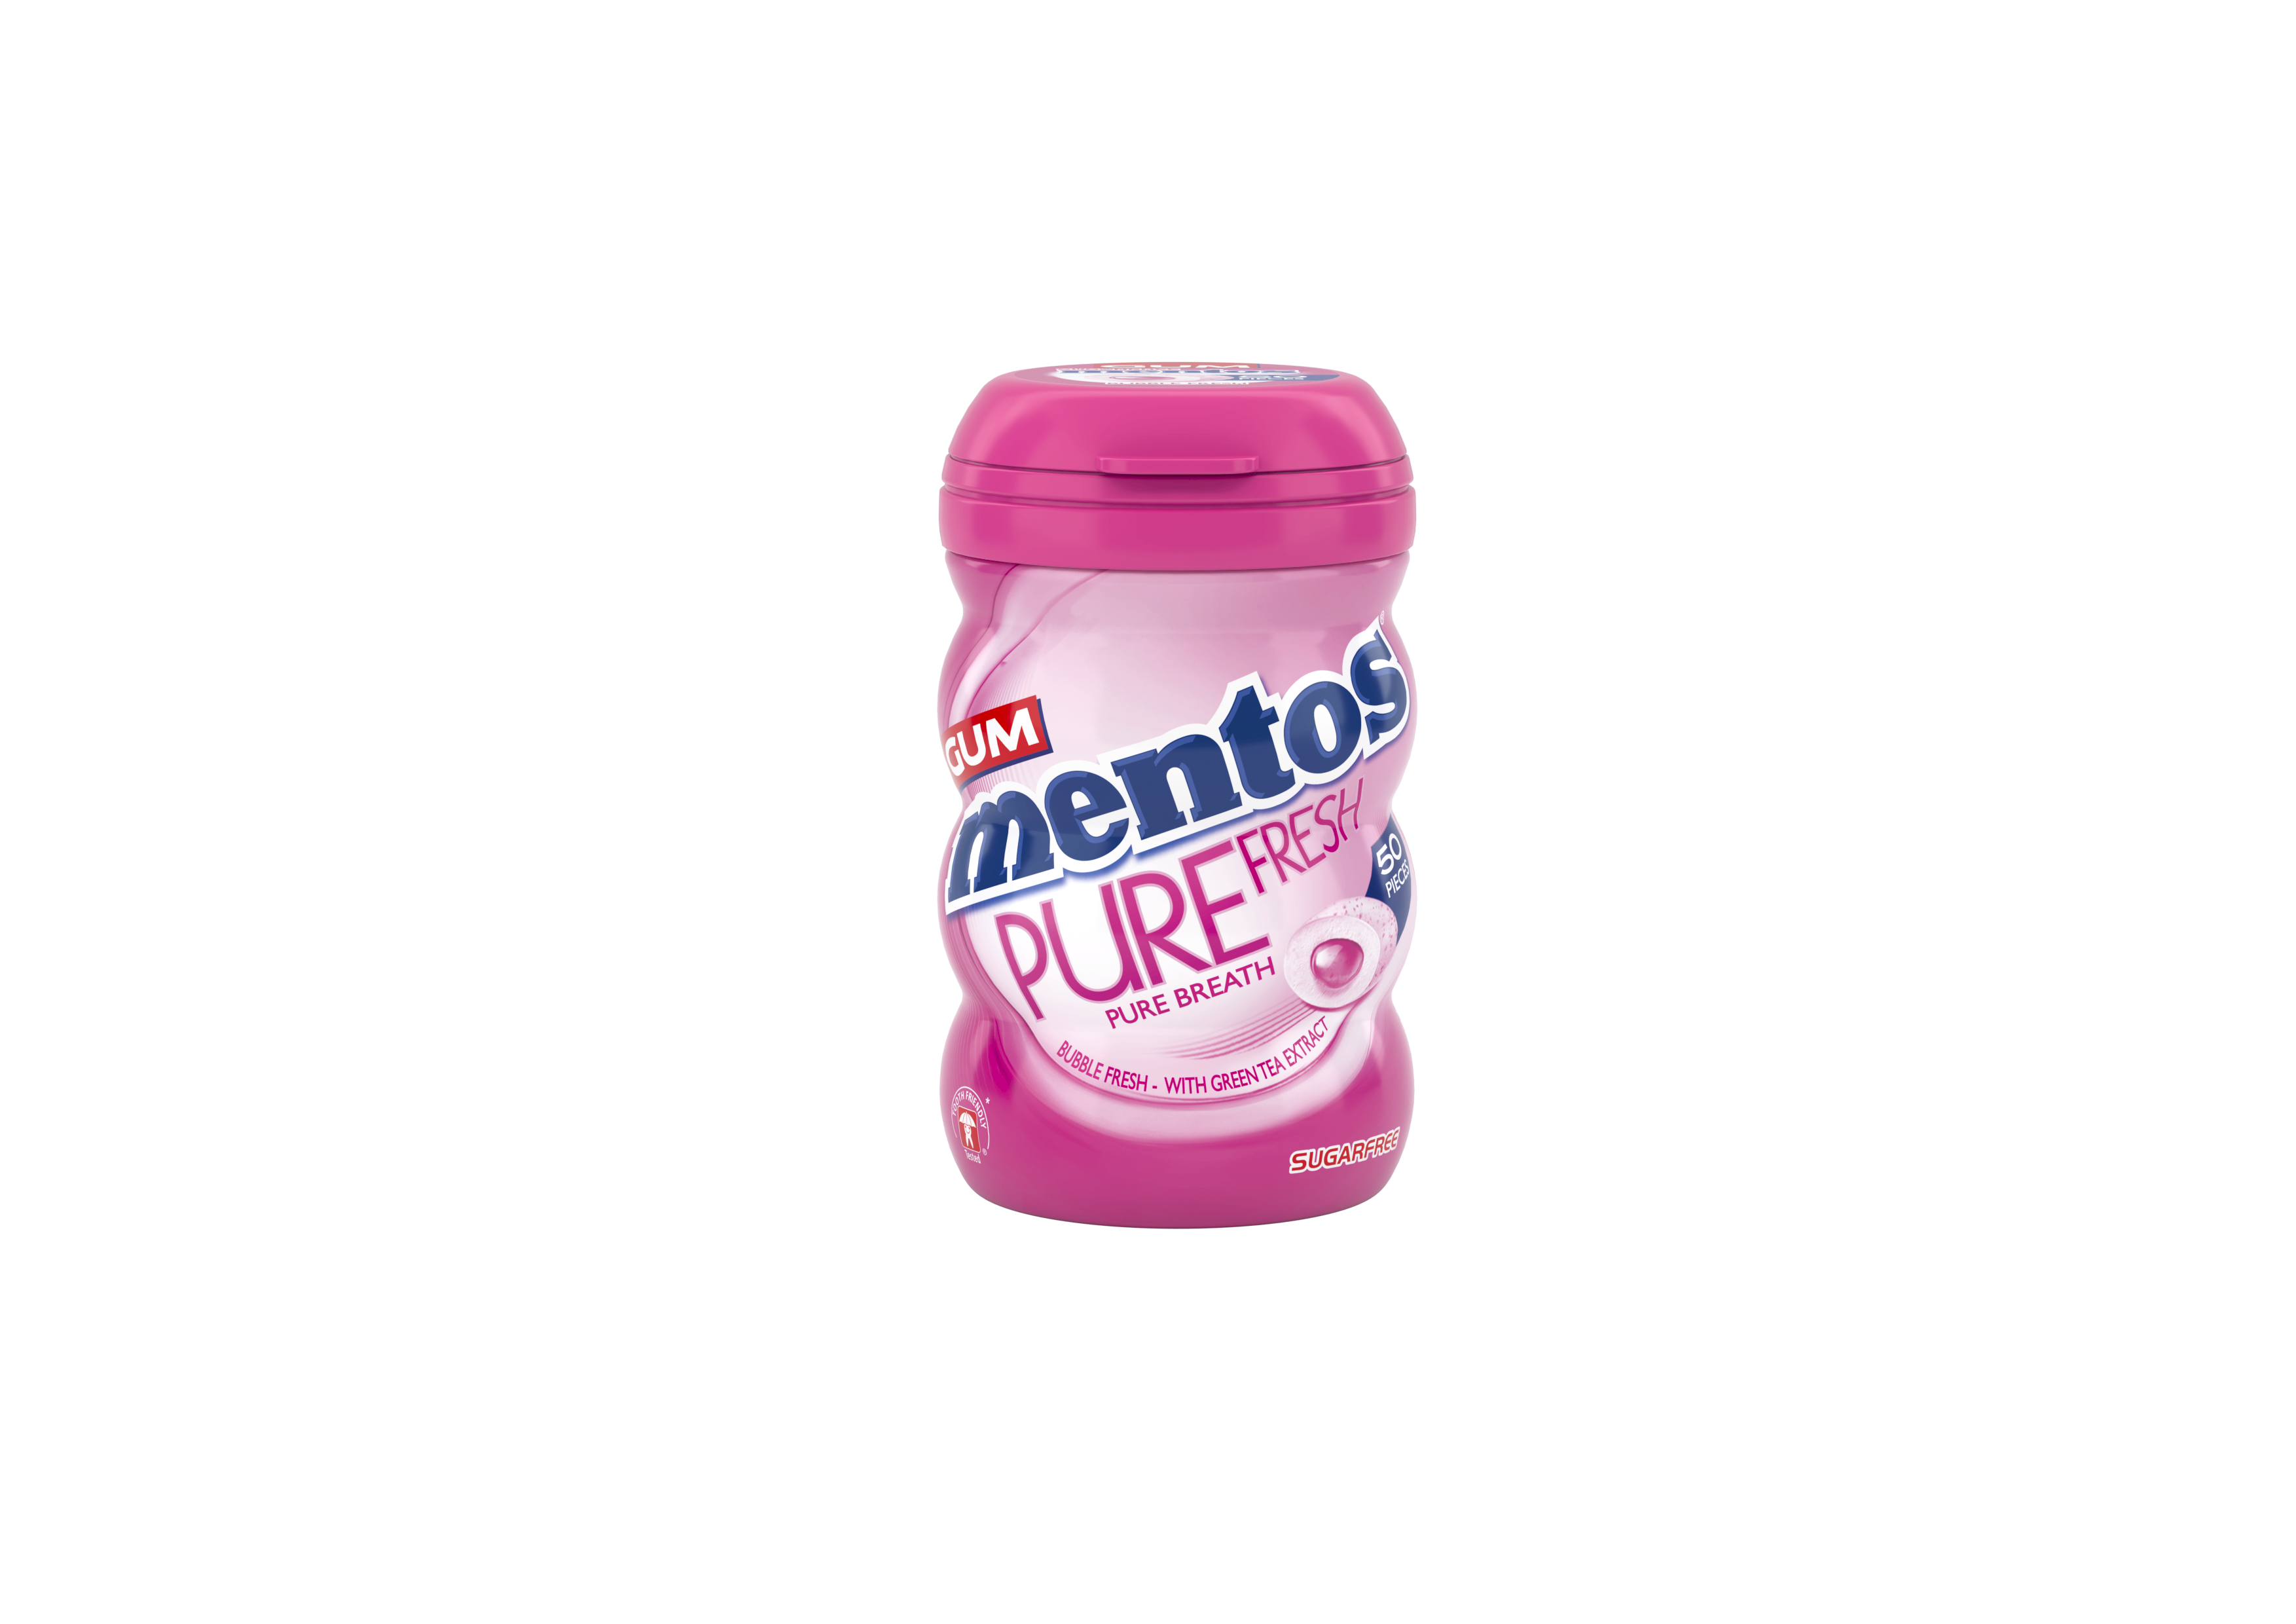 Mentos launches new Pure Fresh variants